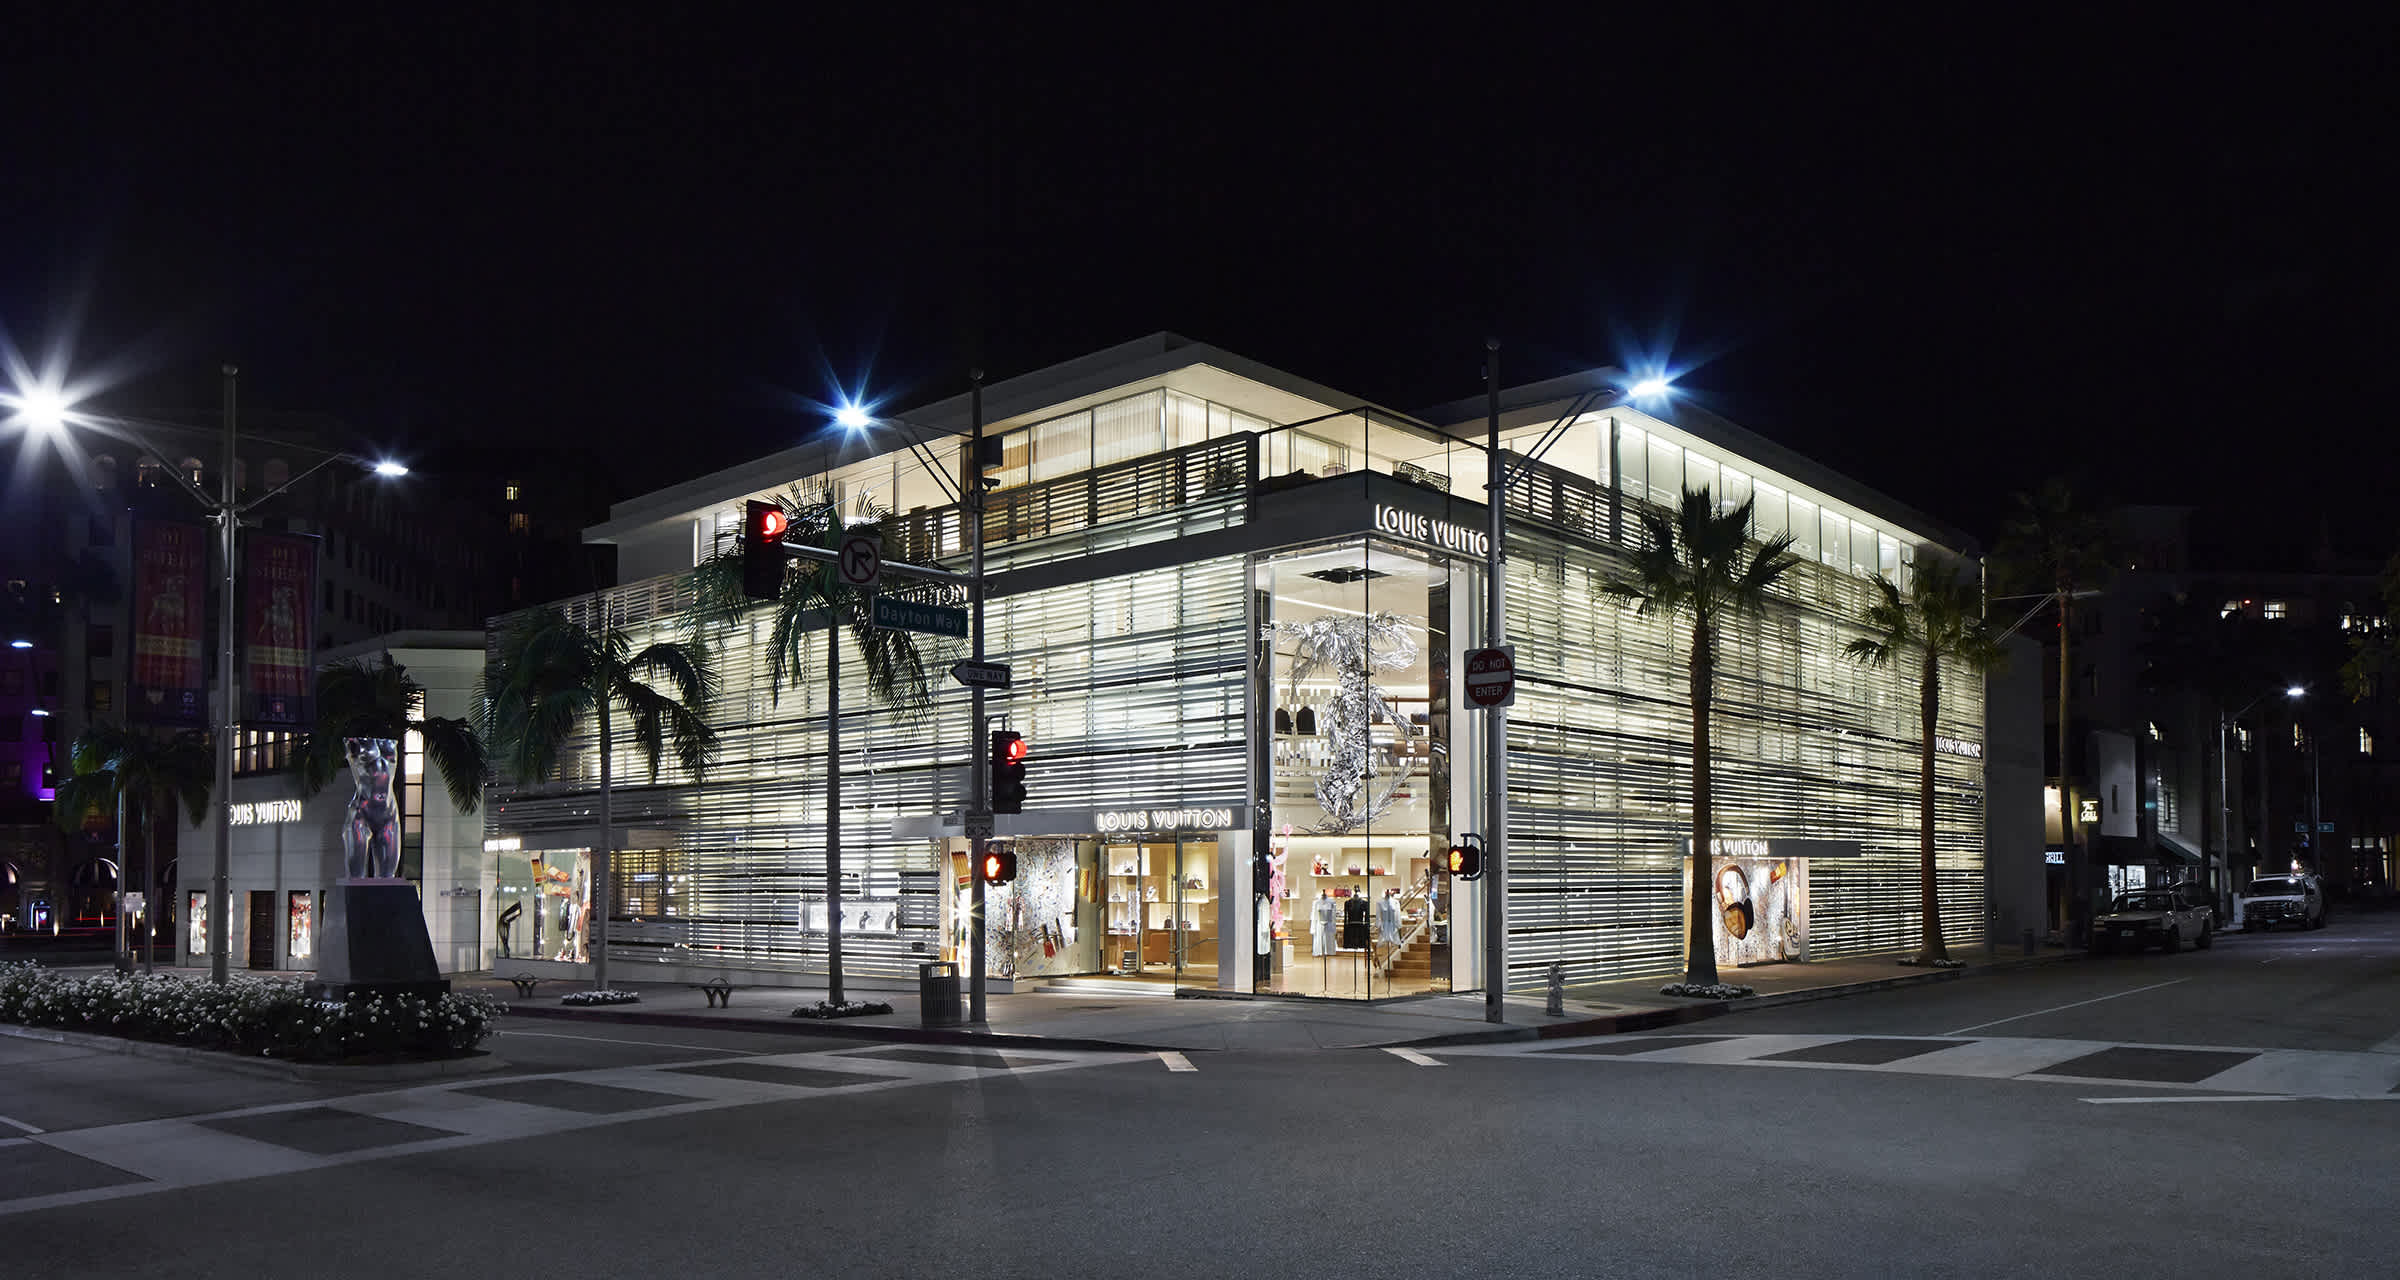 Louis Vuitton Rodeo Drive in Beverly Hills, California